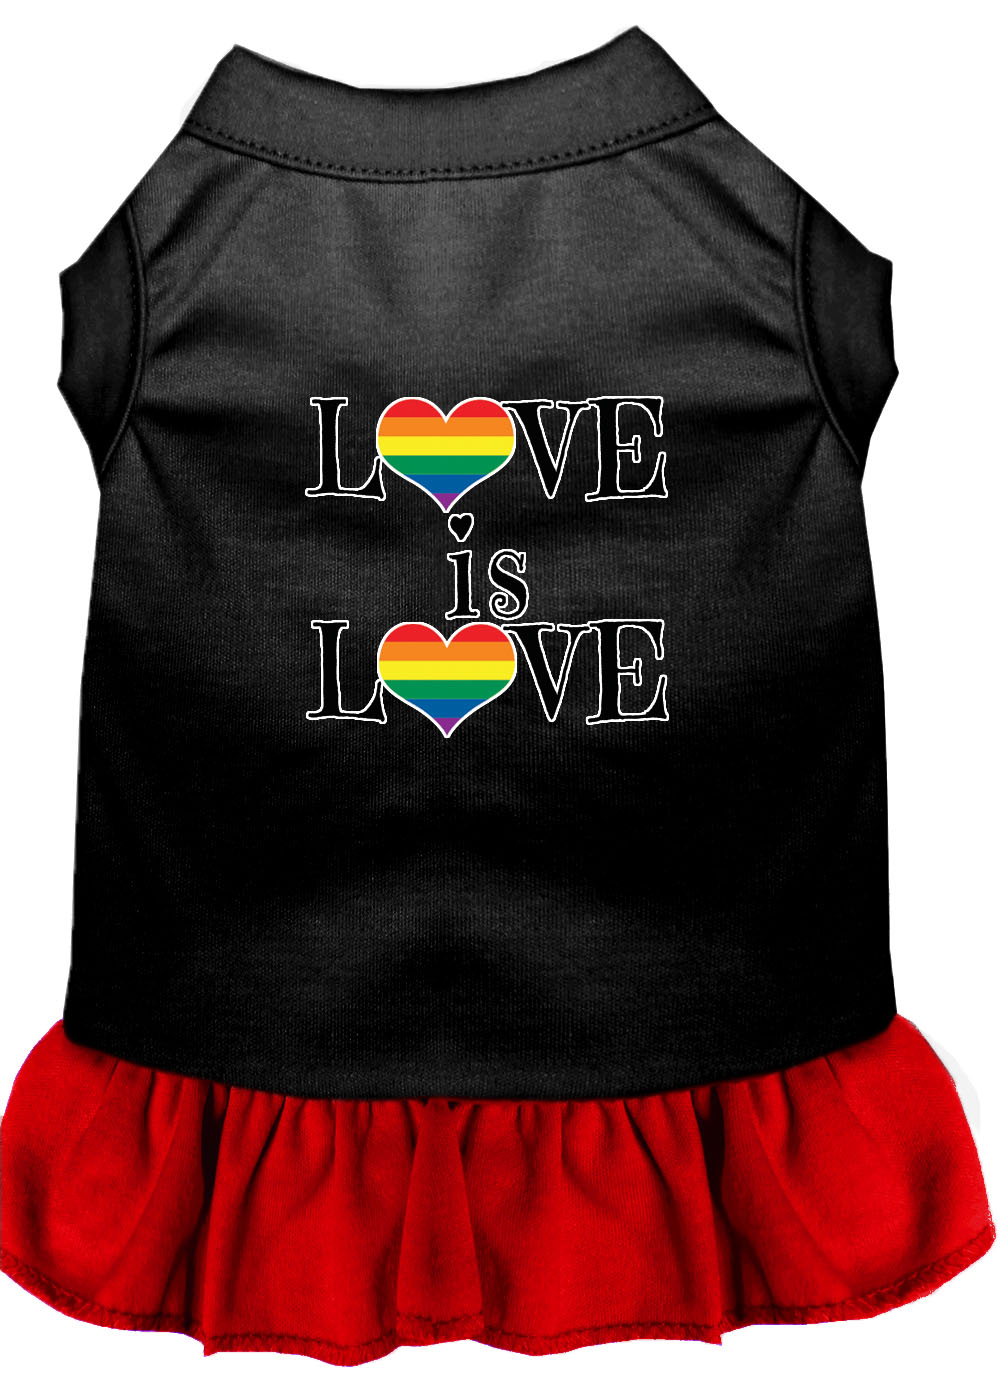 Love is Love Screen Print Dog Dress Black with Red XL